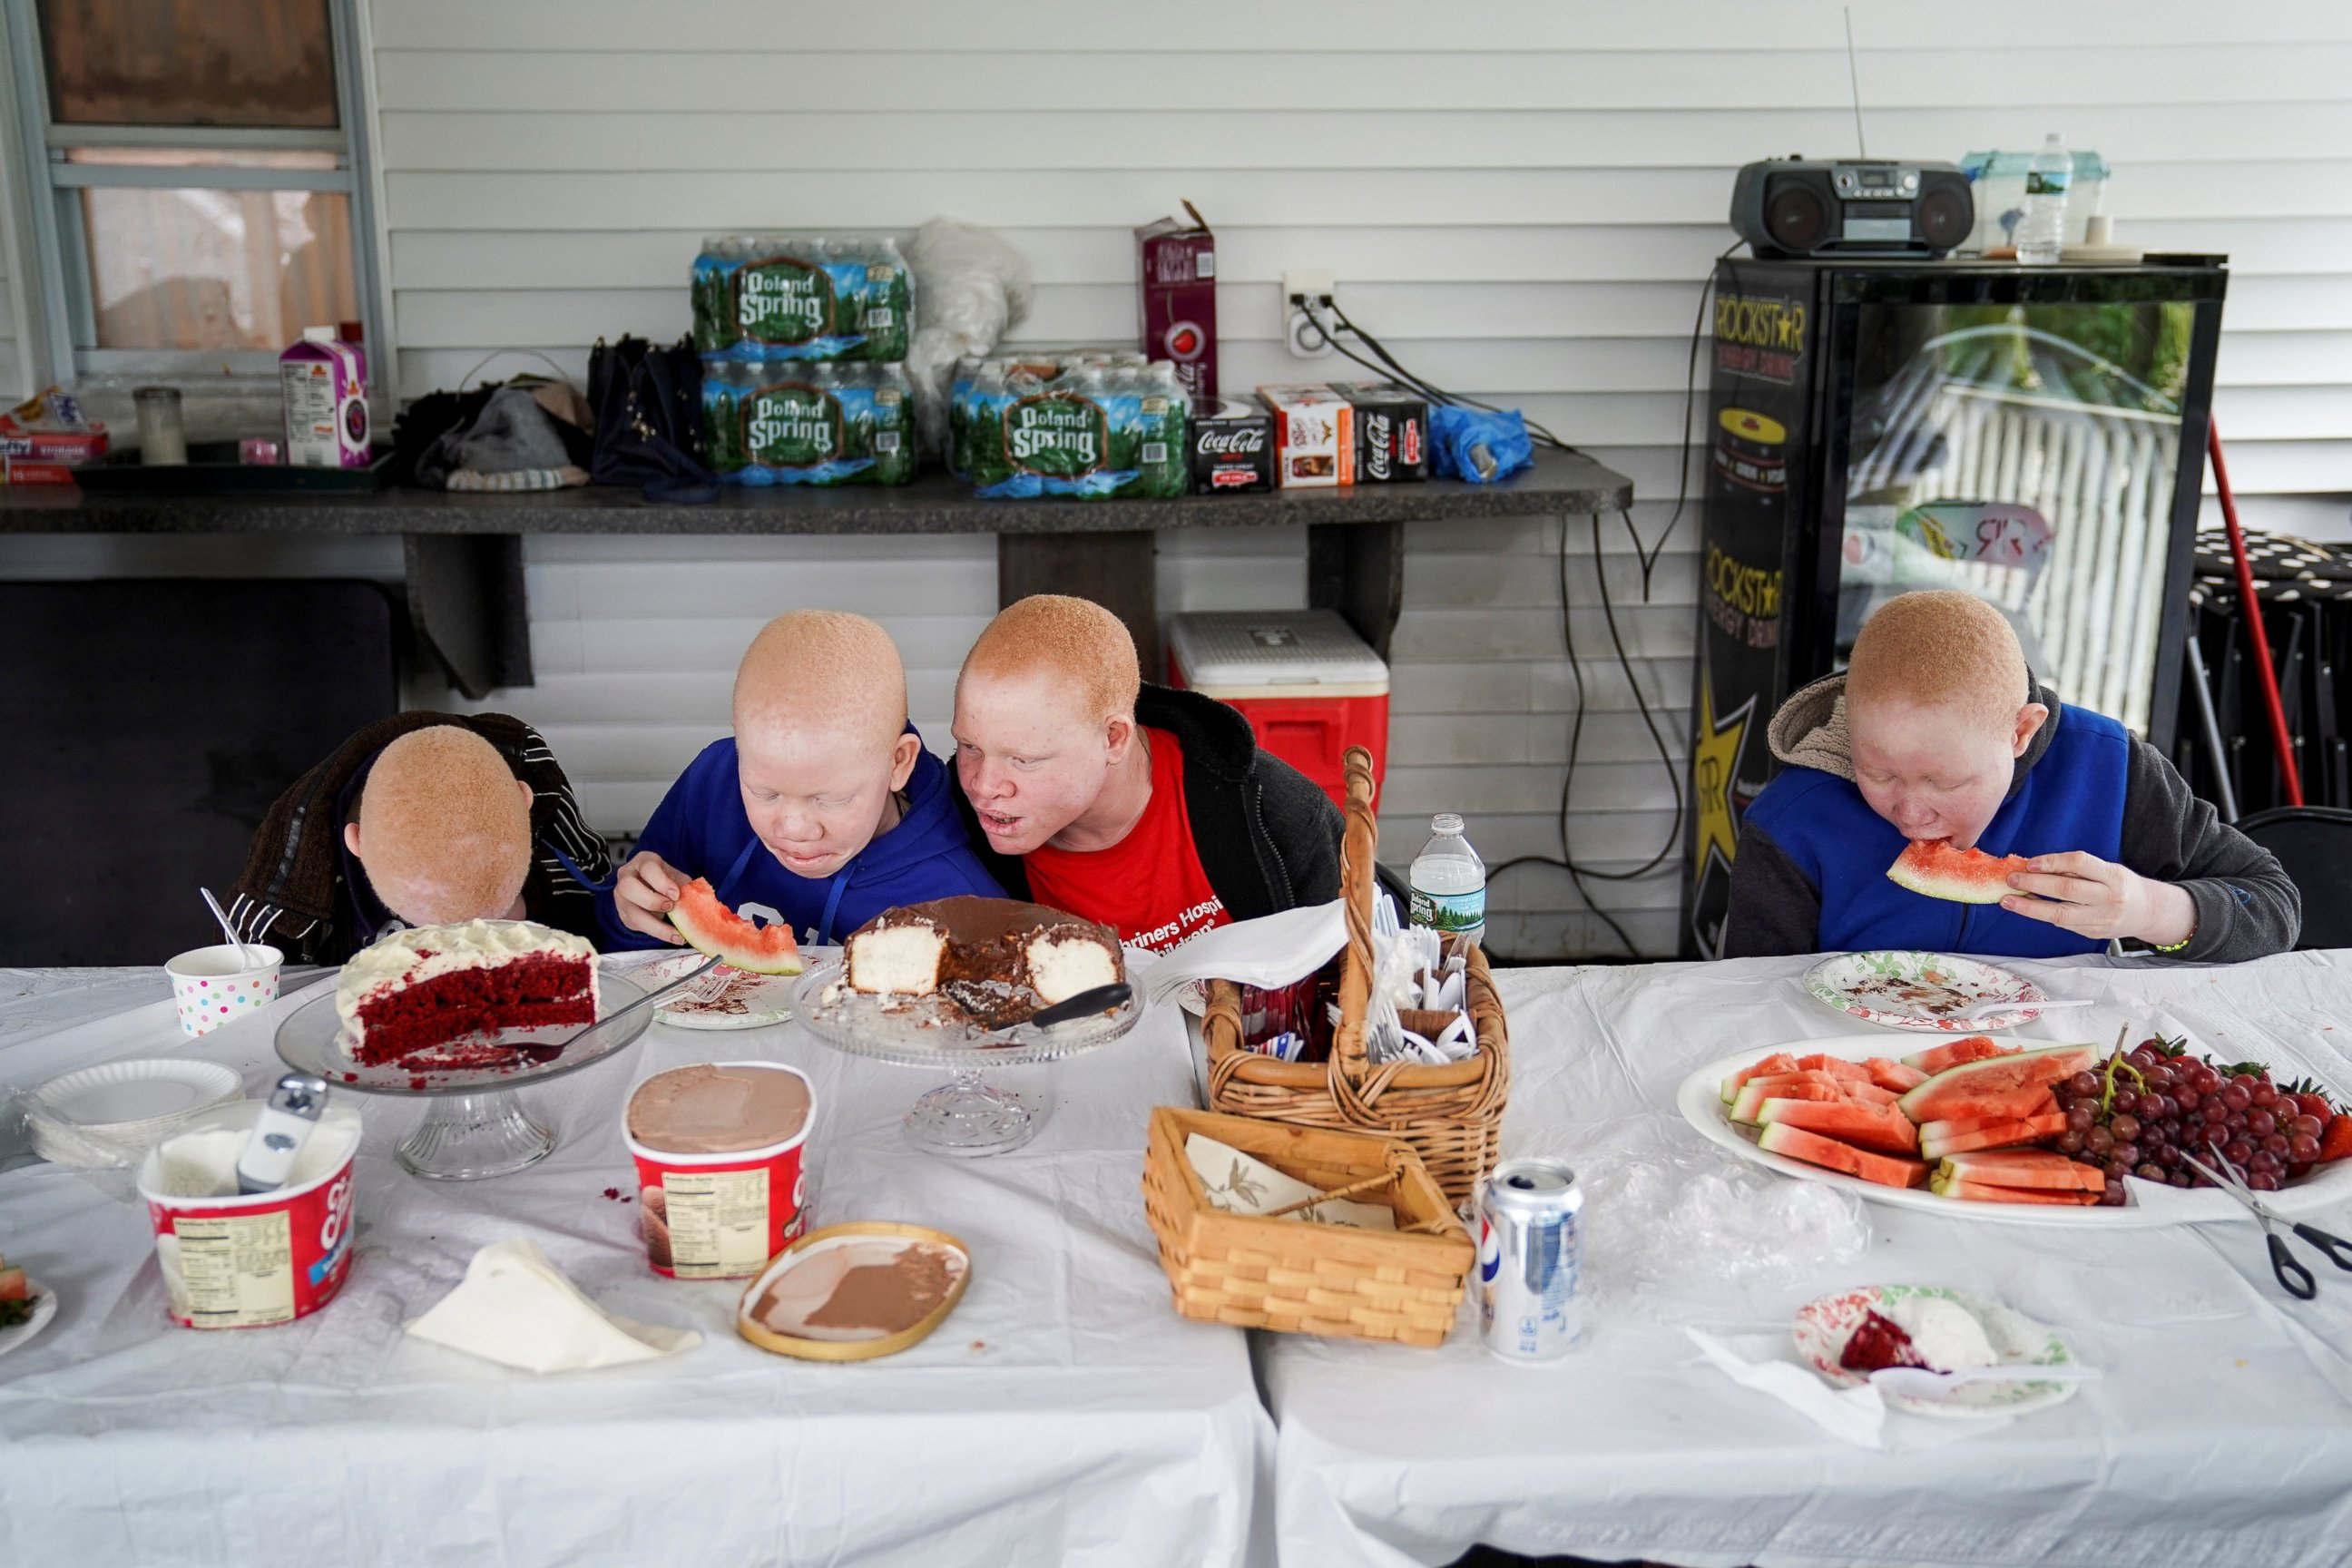 Baraka Lusambo, 7, Mwigulu Magesaa 14, Emmanuel Rutema, 15, and Pendo Noni 16, Tanzanians with albinism who had body parts chopped off in witchcraft-driven attacks, eat dinner at a home in the Staten Island borough of New York, June 4, 2017. 